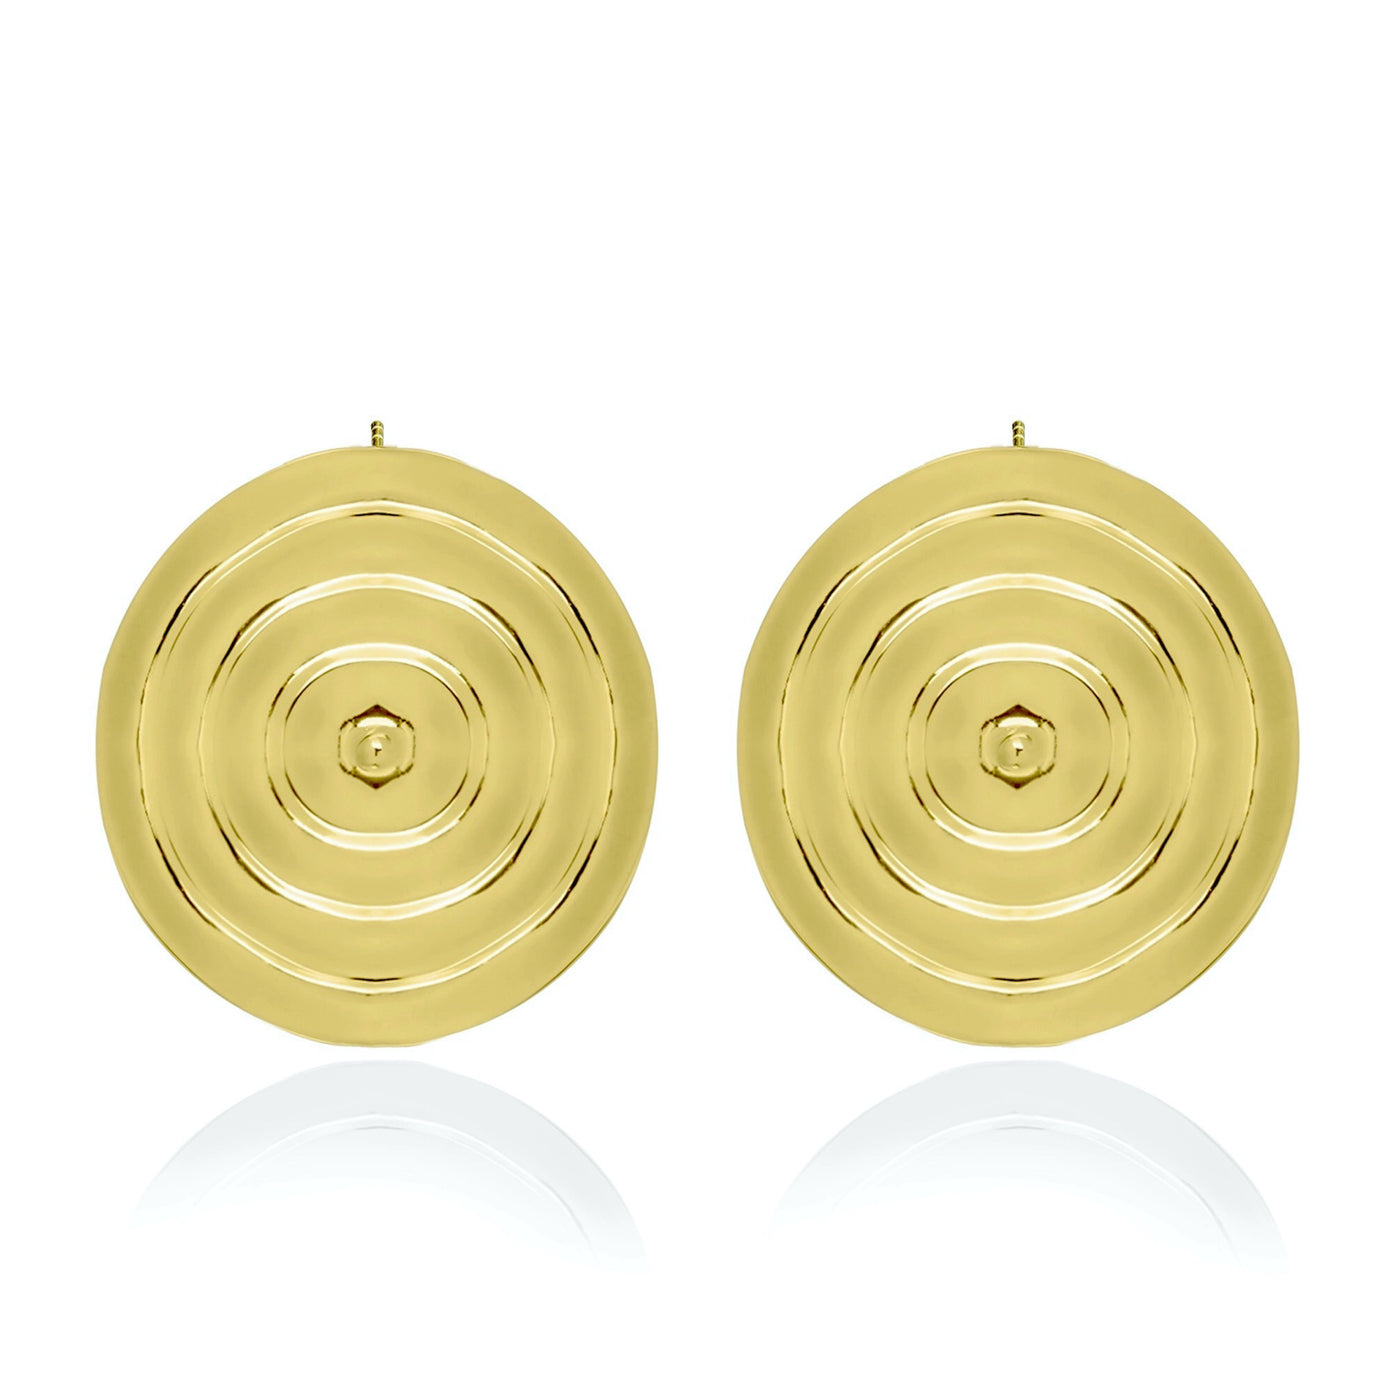 Gold round earrings from Atelier ORMAN